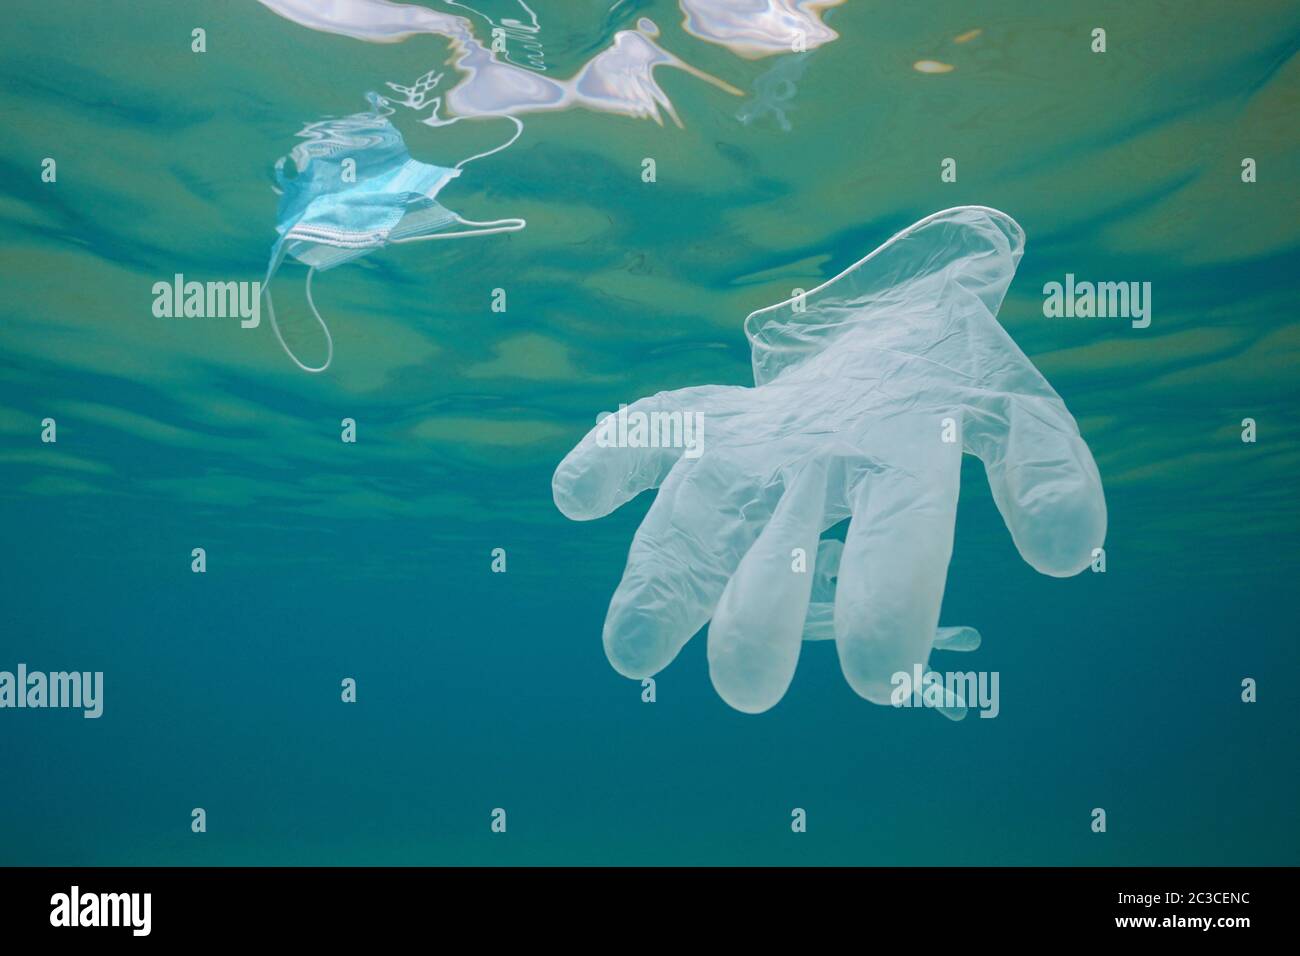 Glove and face mask underwater, ocean plastic waste pollution since coronavirus COVID-19 pandemic Stock Photo